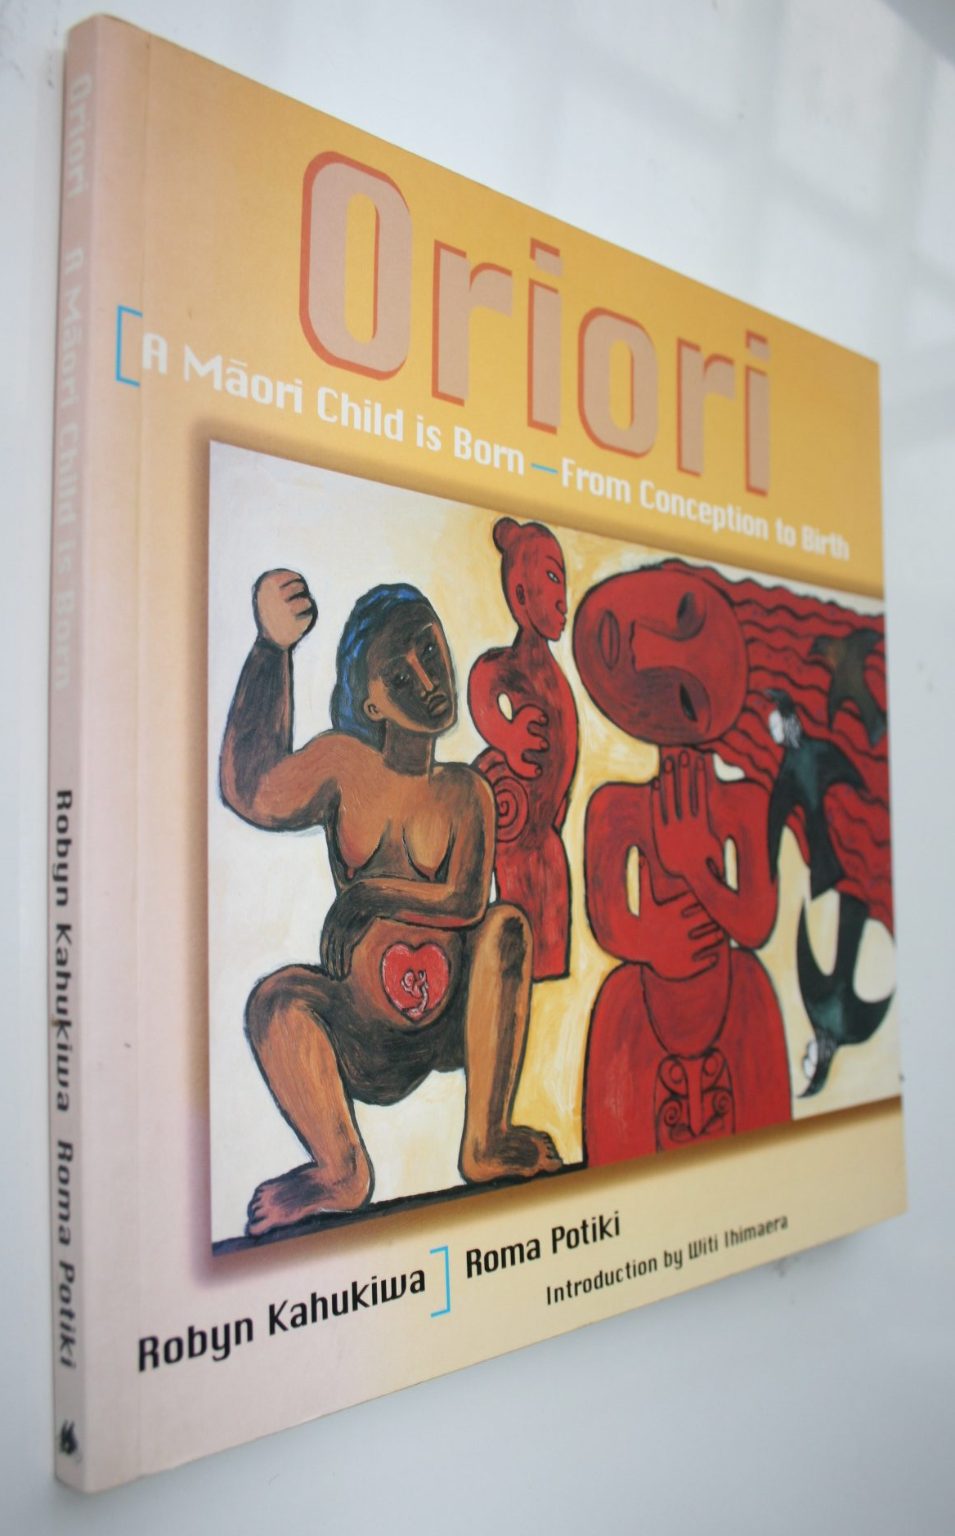 Oriori: A Maori child is born, from conception to birth. 1999. VERY SCARCE. BY Robyn Kahukiwa & Roma Potiki.